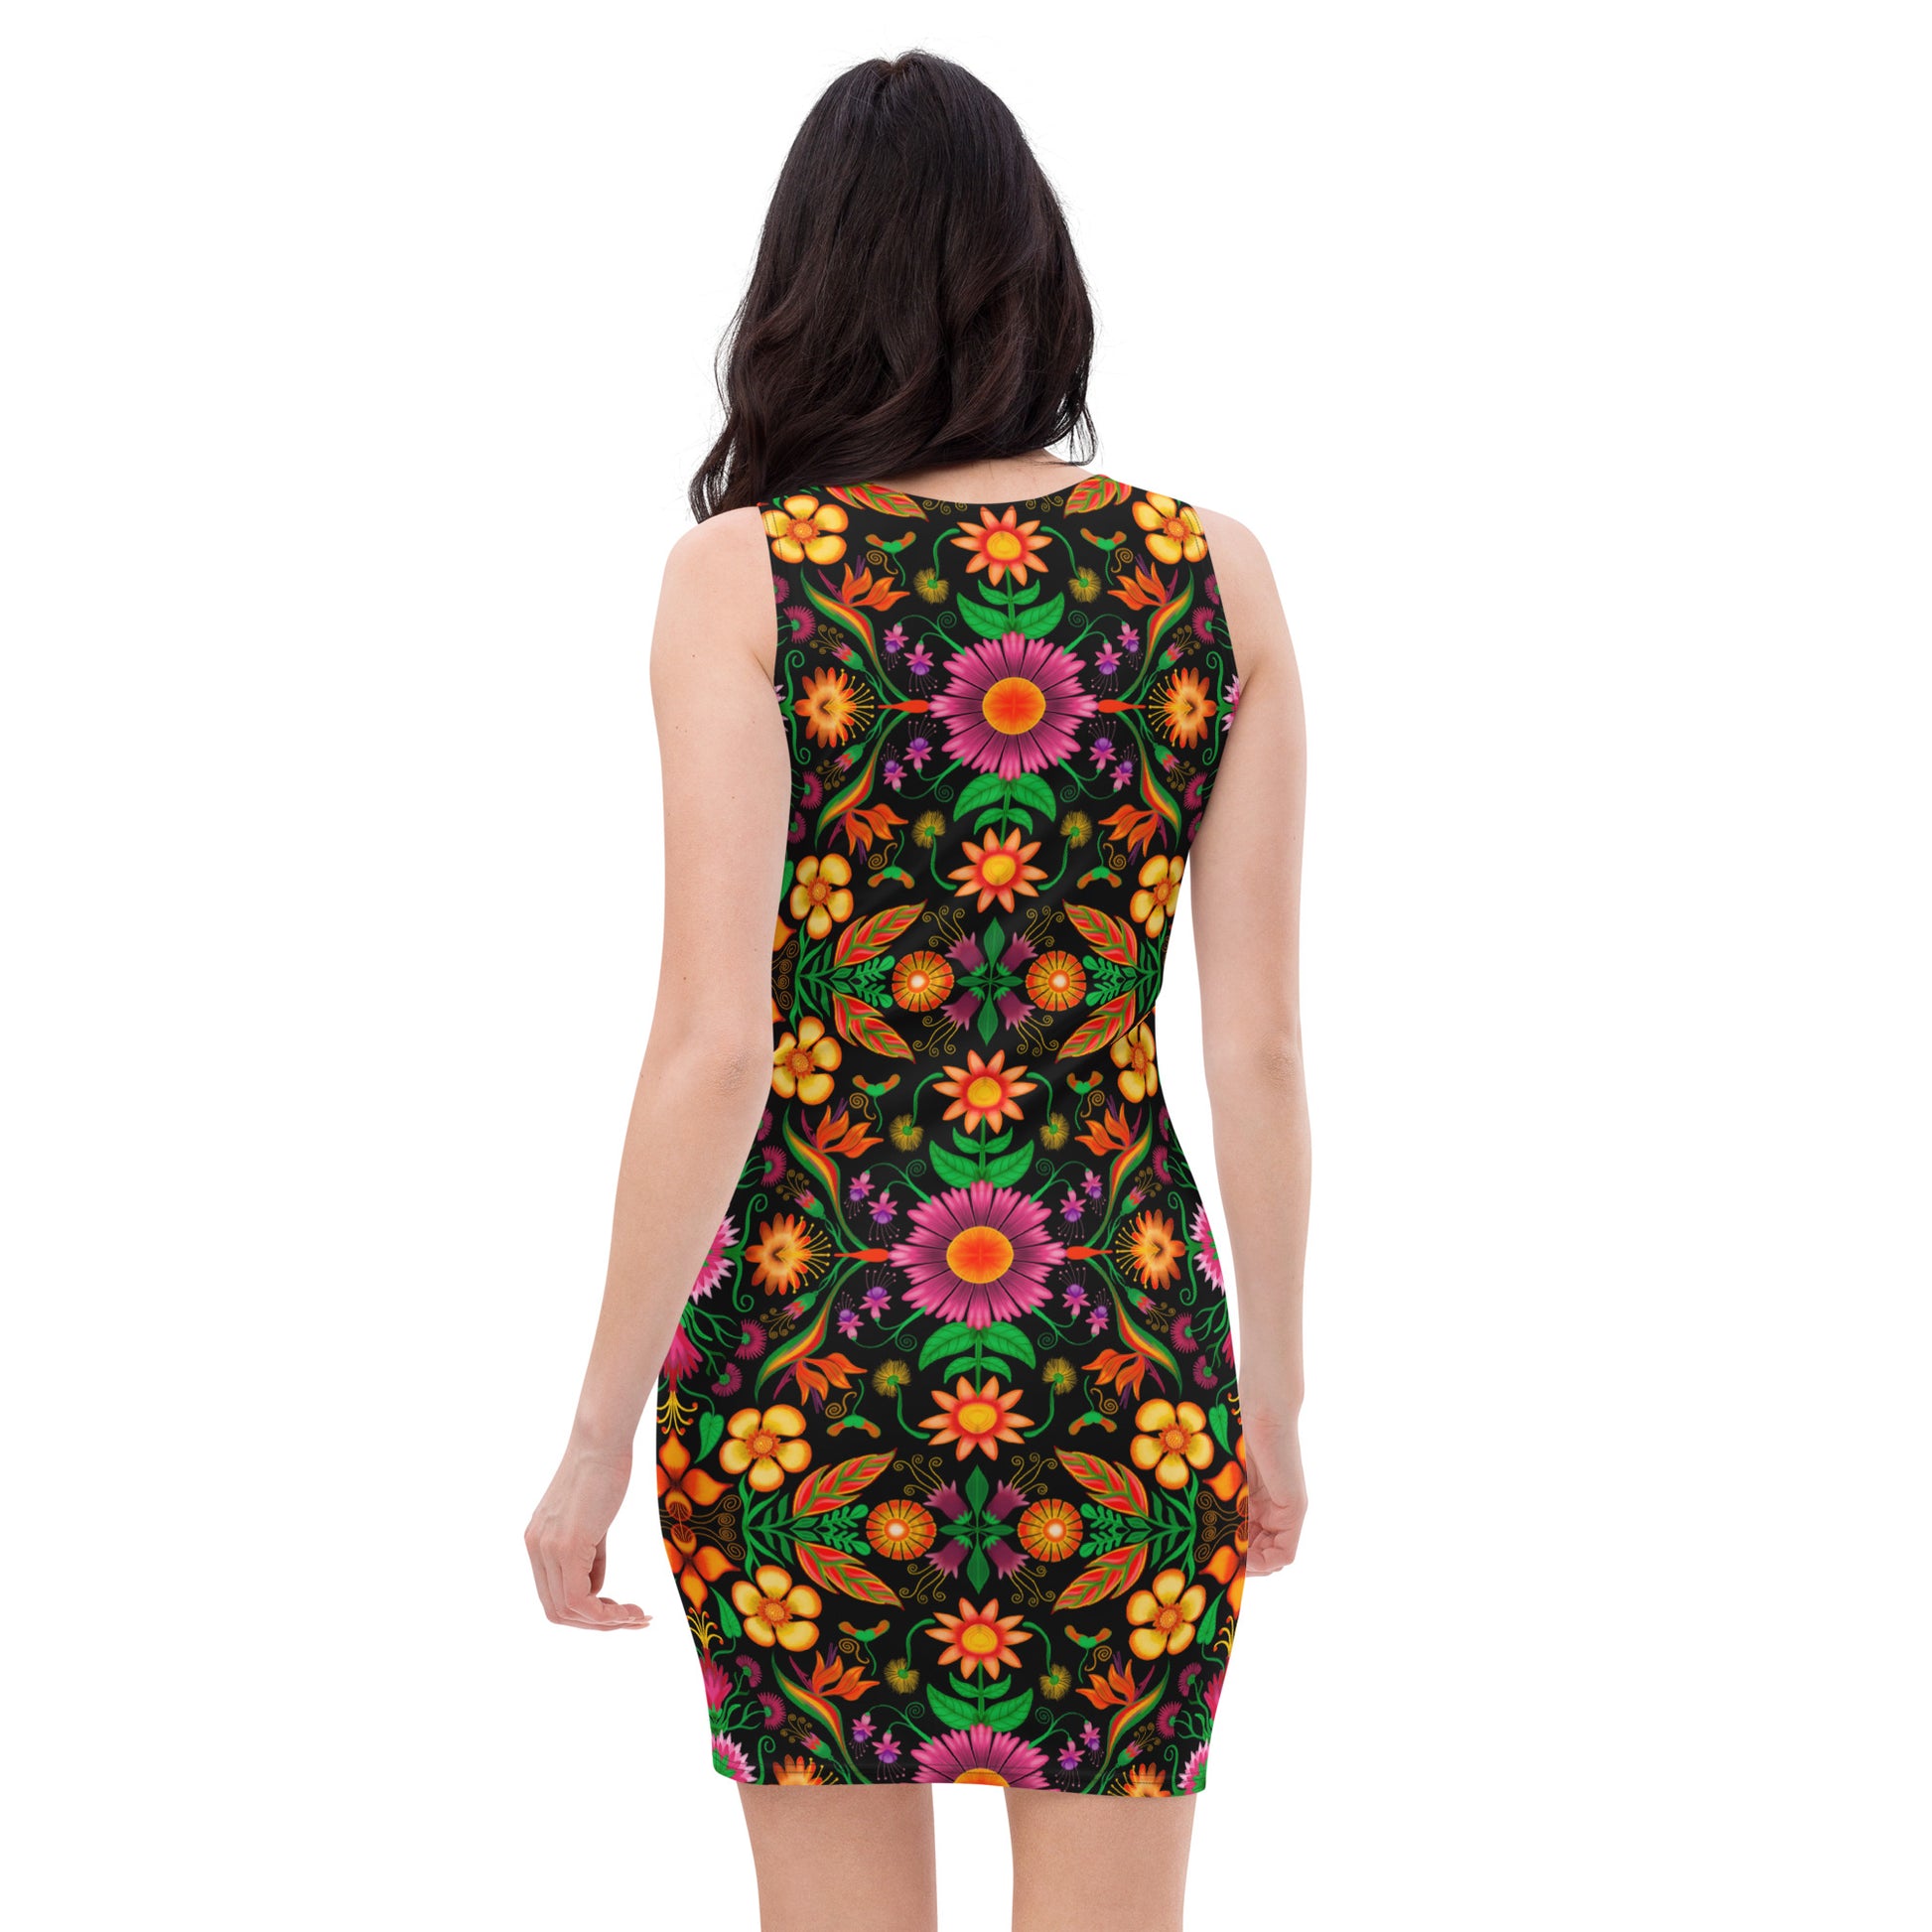 Wild flowers in a luxuriant jungle Sublimation Cut & Sew Dress. Back view